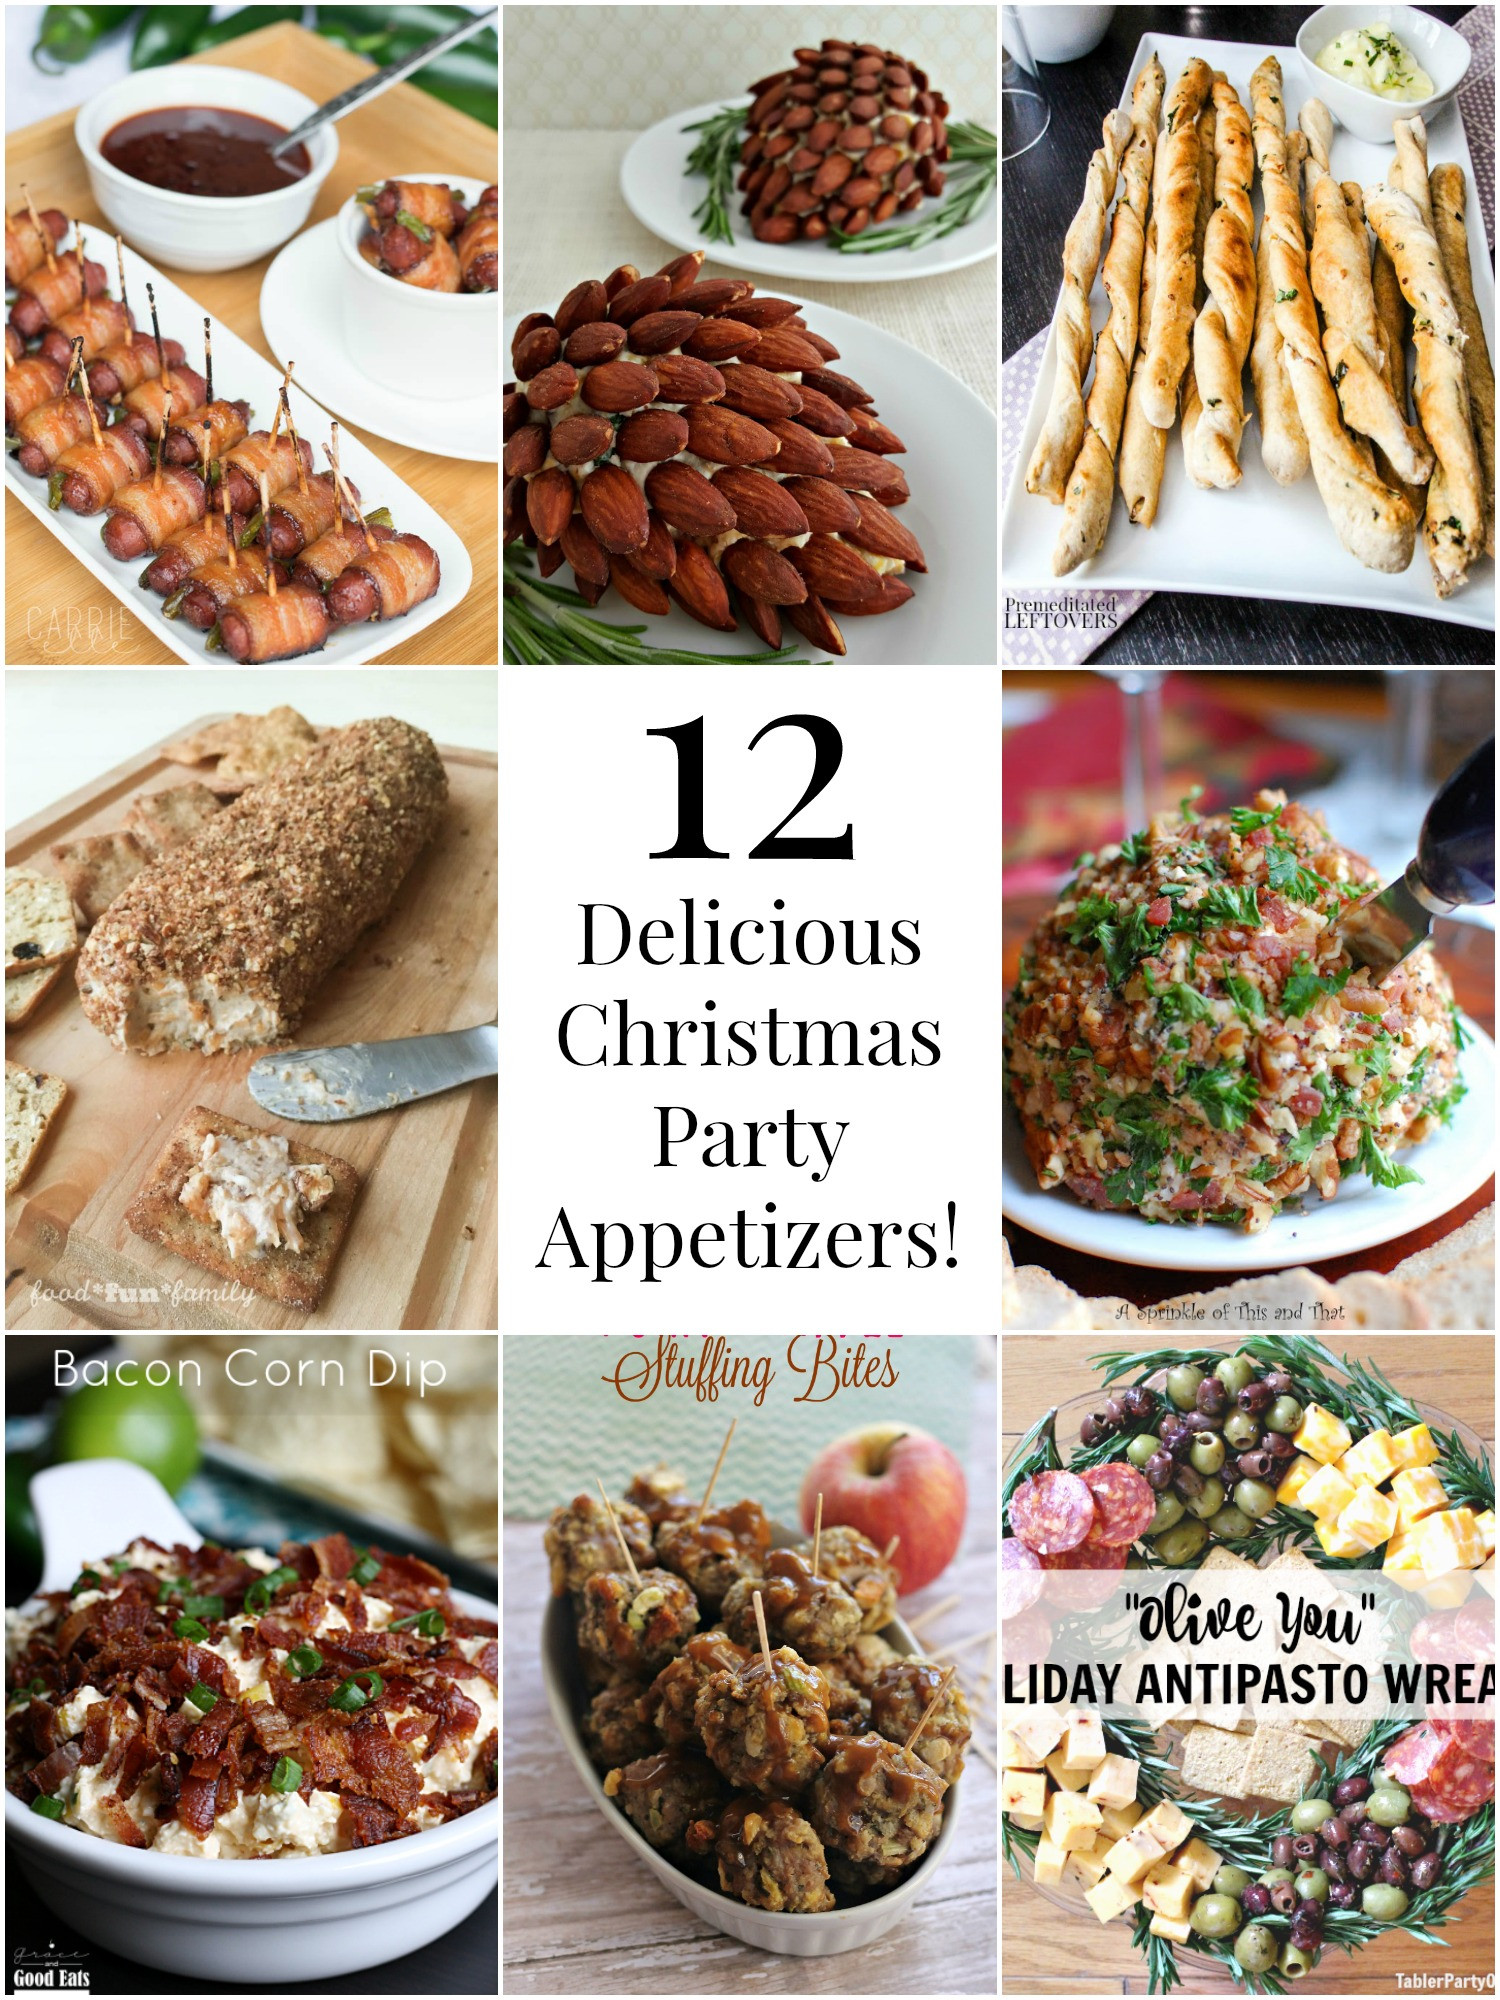 Party Appetizers For Christmas
 So Creative 12 Delicious Christmas Party Appetizers